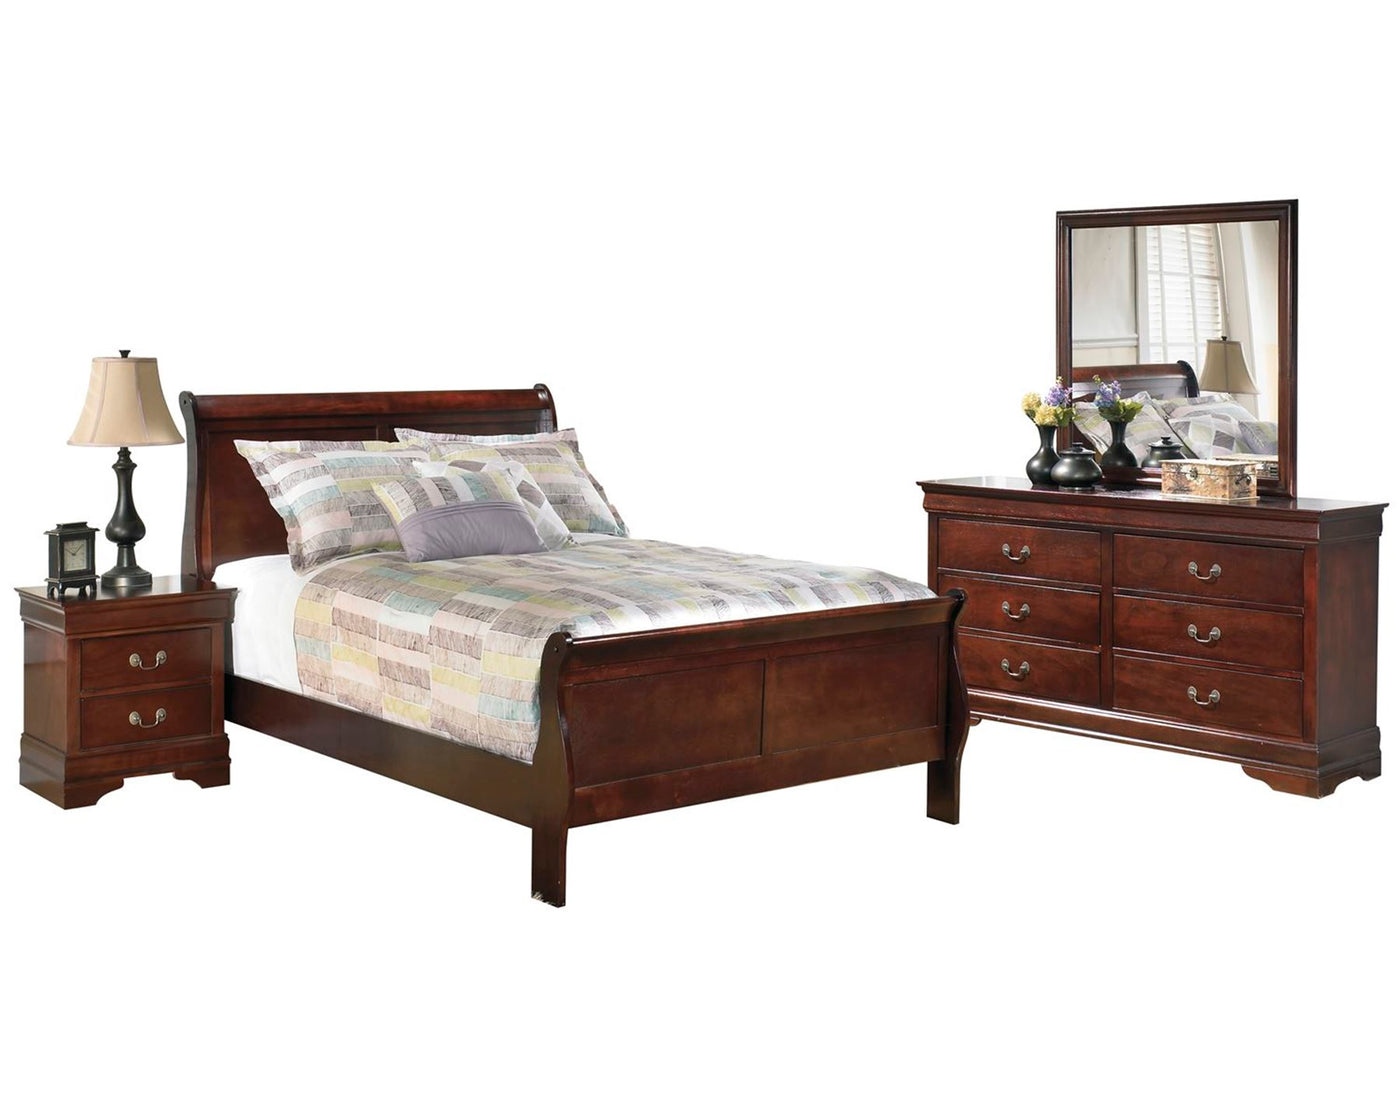 Ashley Alisdair 4pc Bedroom Set E King Sleigh Bed One Nightstand